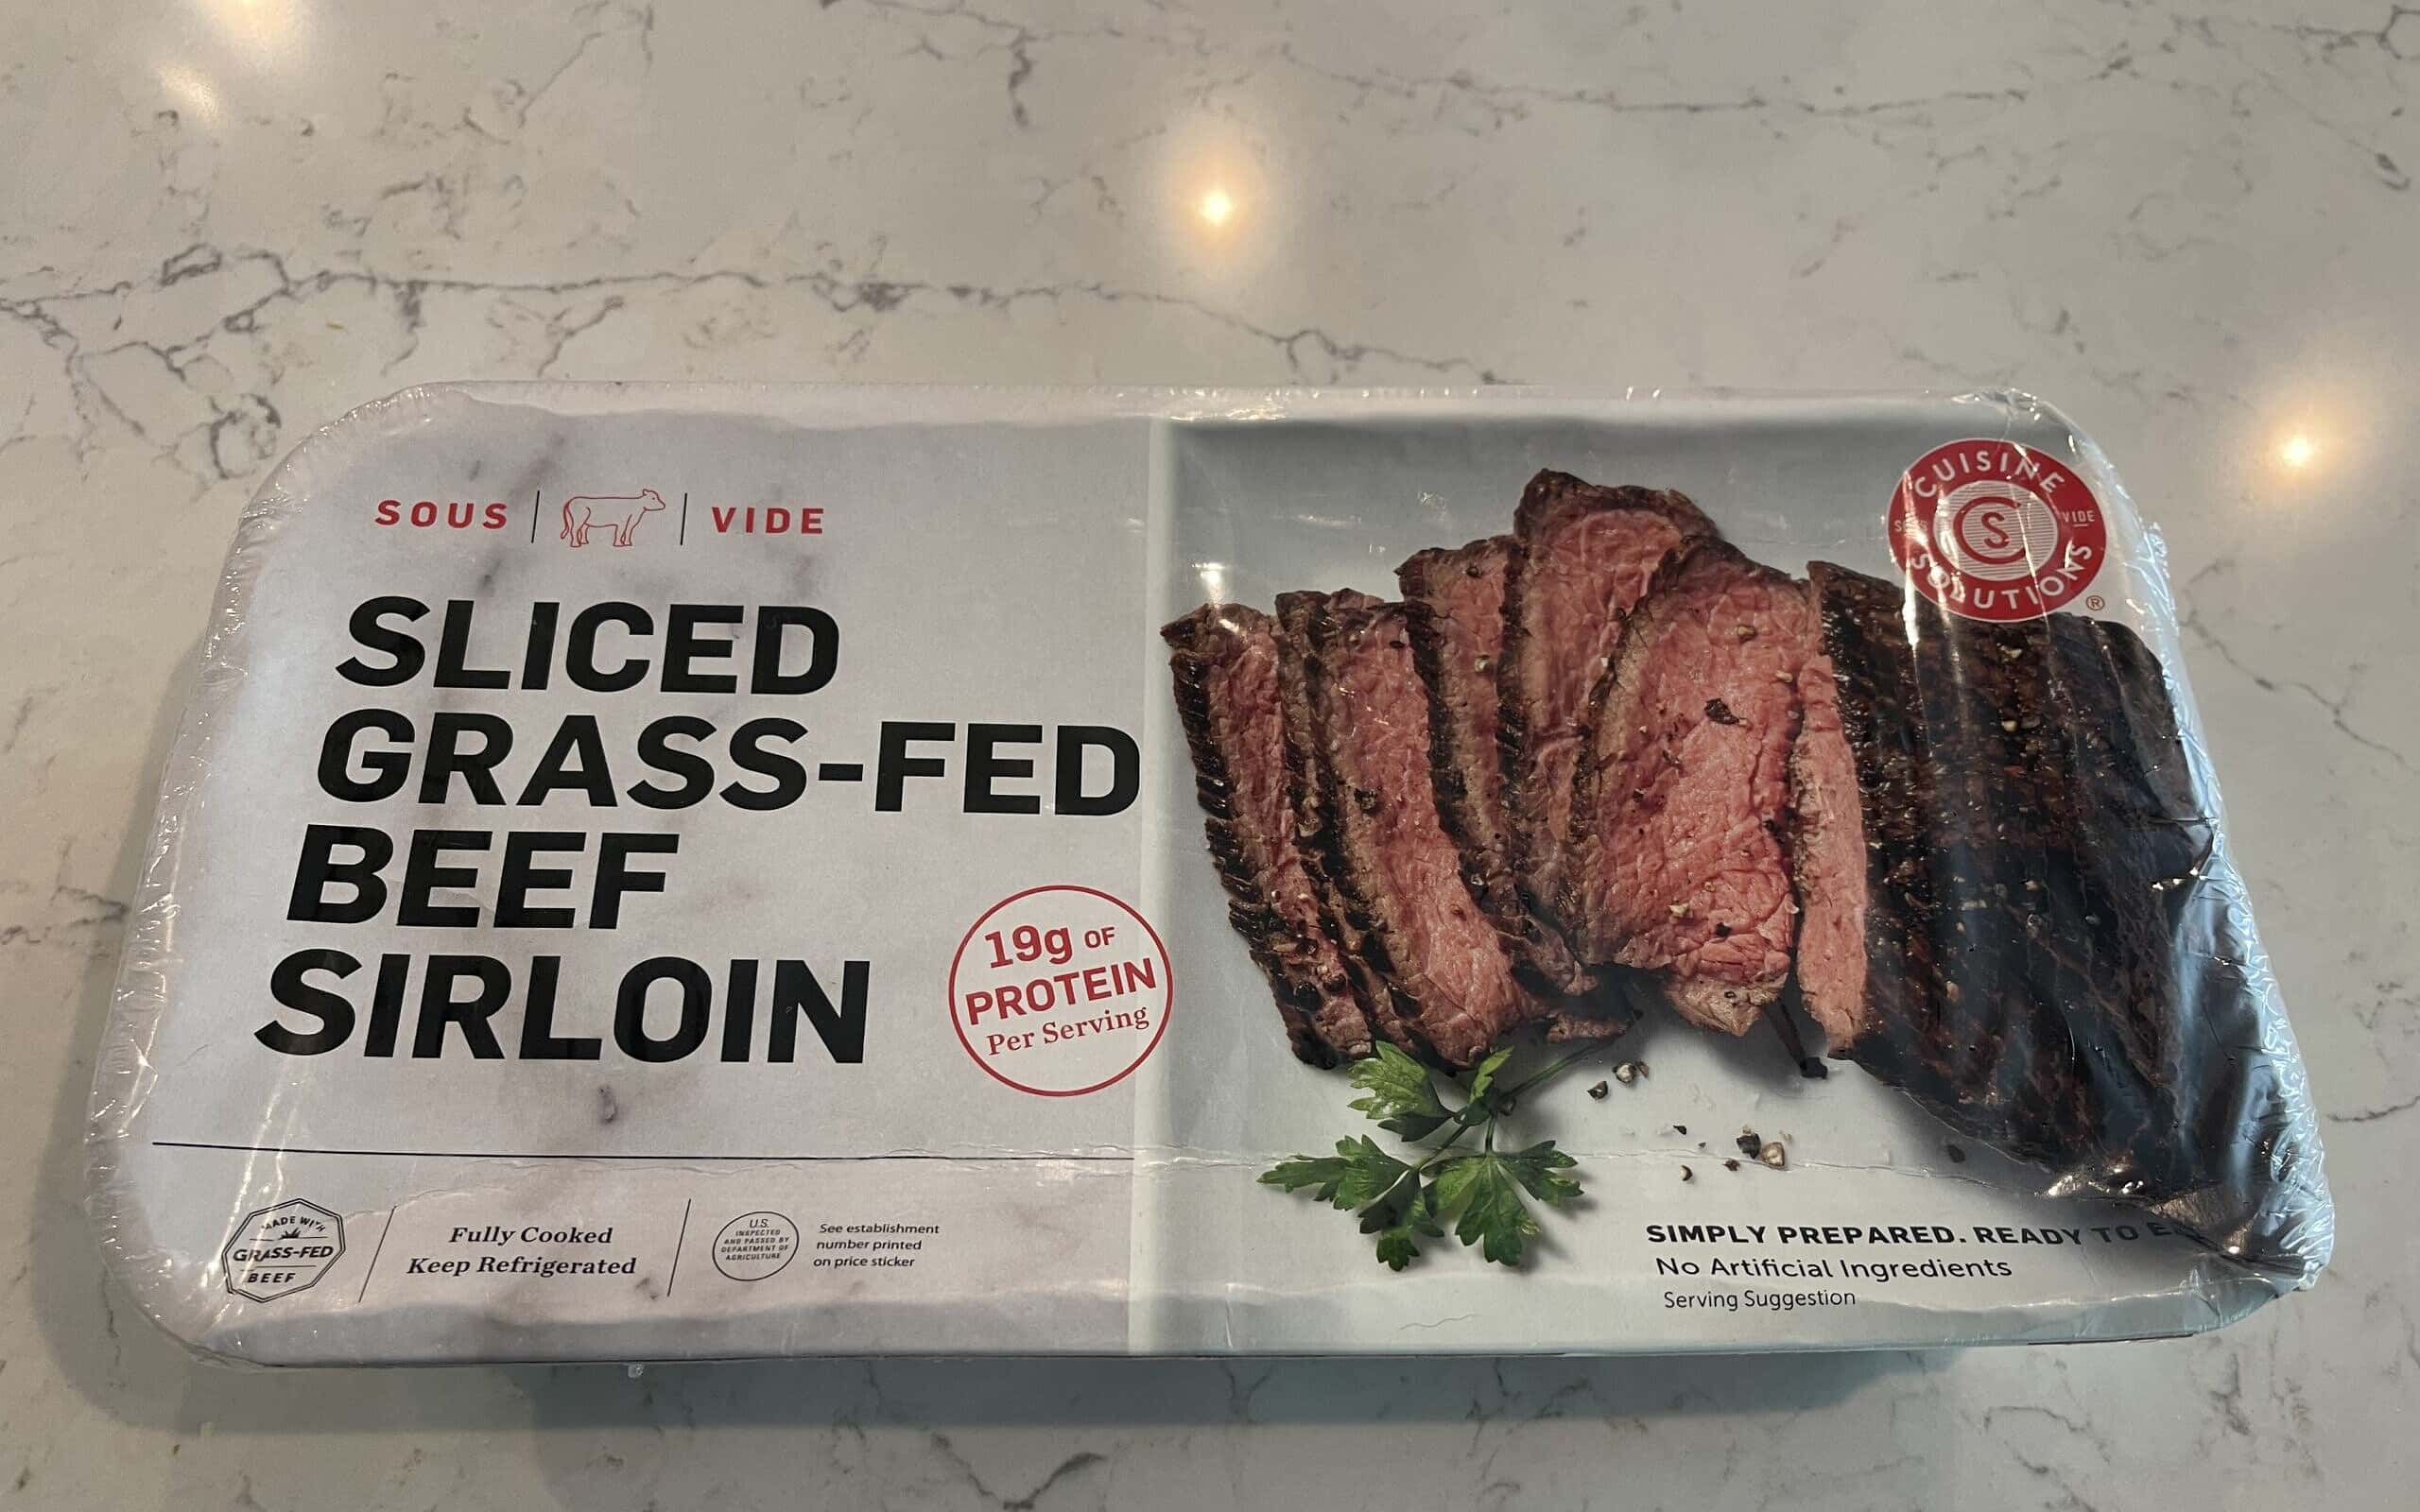 Sliced Grass-Fed Beef Sirlon from Costco